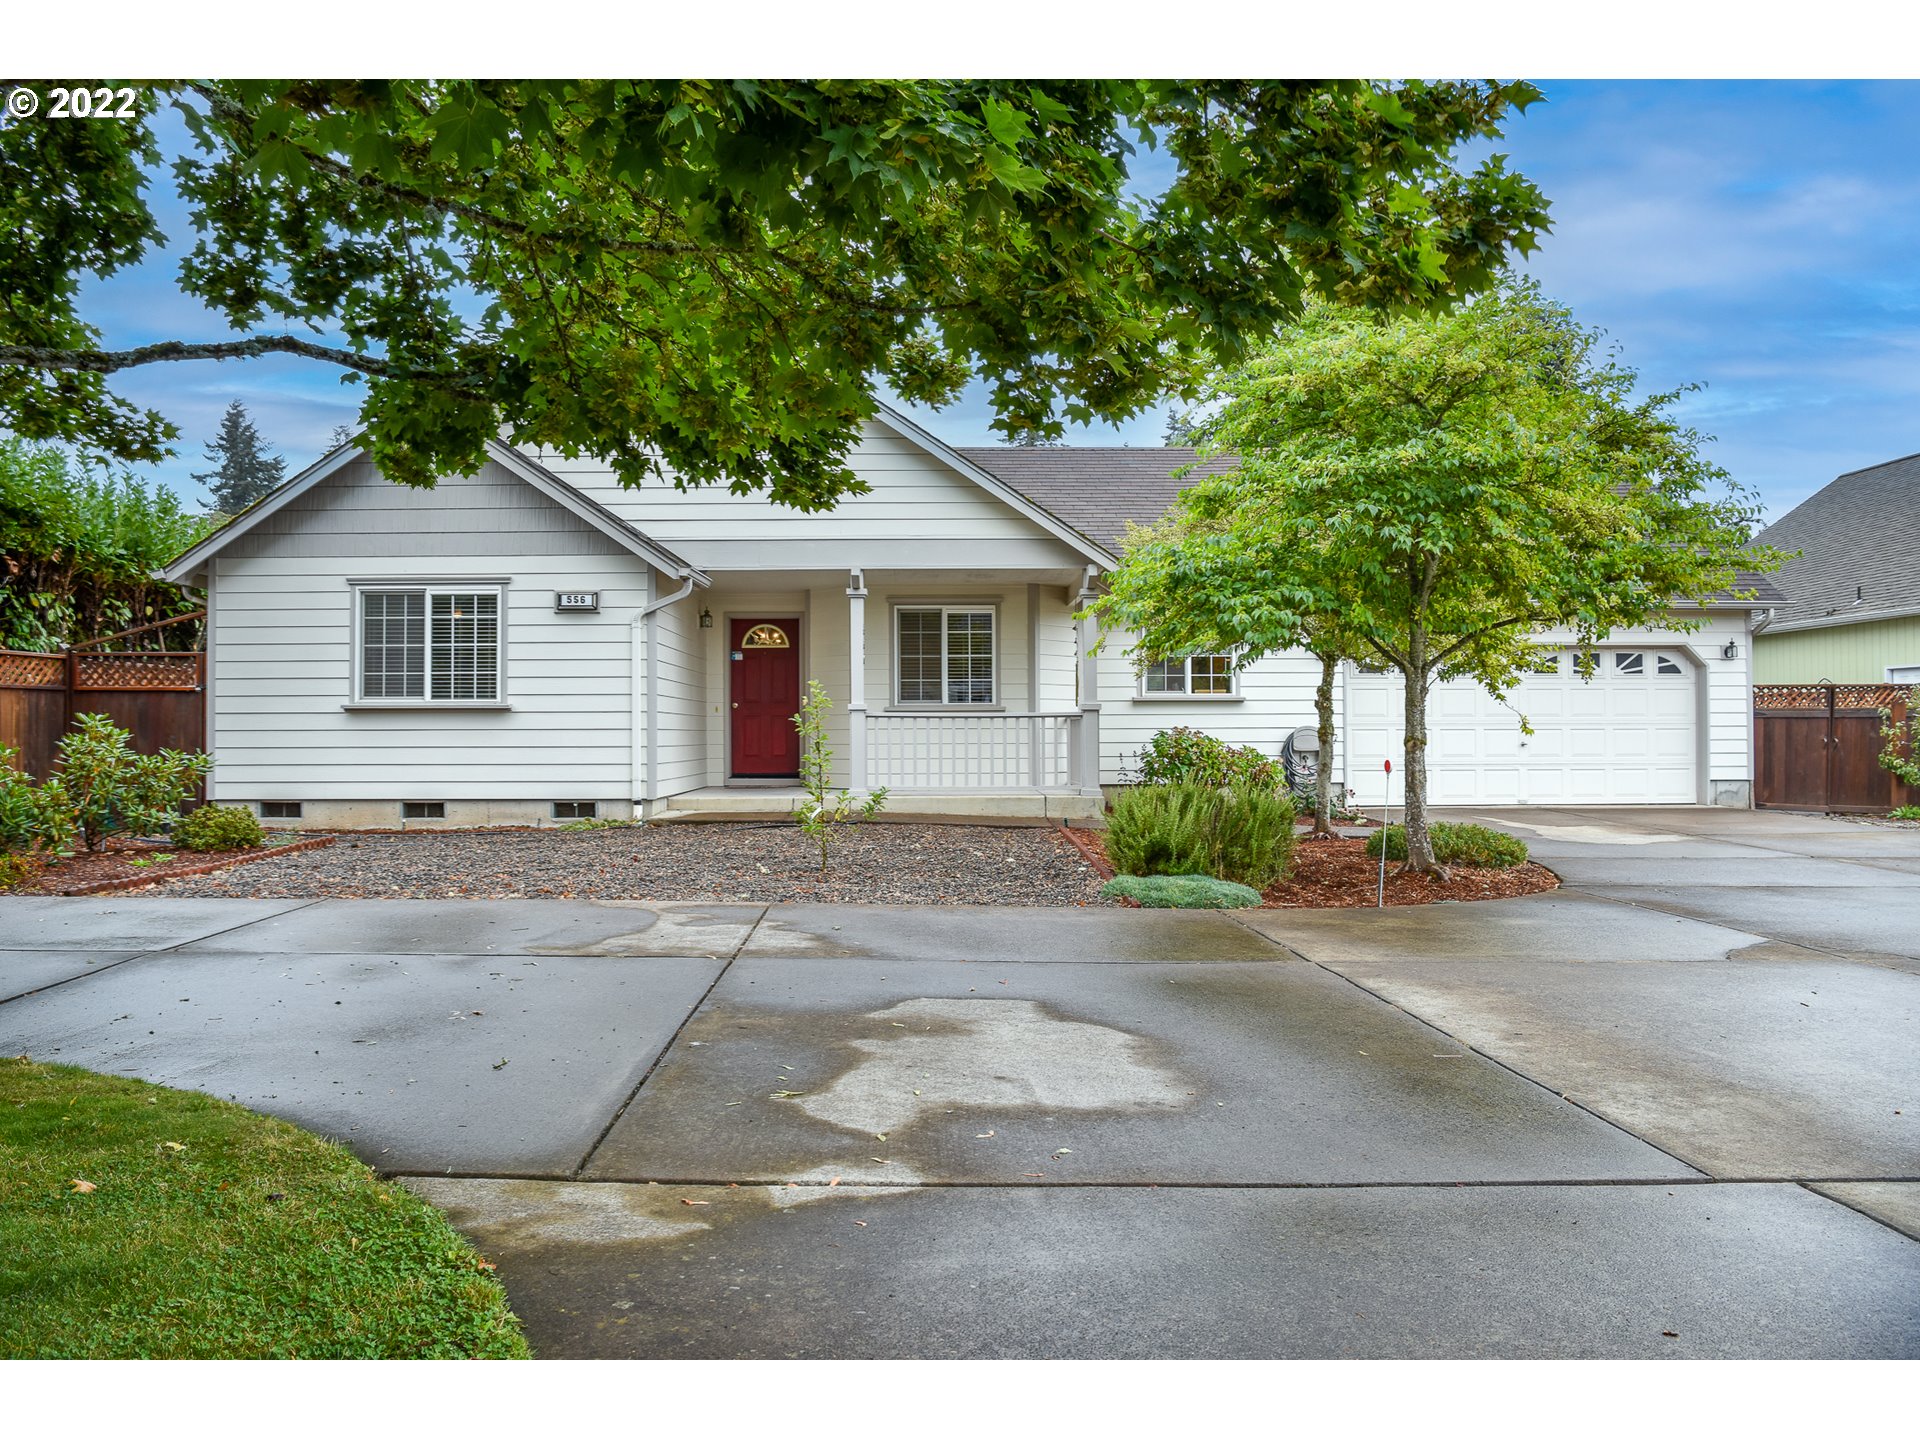 Well maintained 3-bedroom, 2-bath home in the Santa Clara area of Eugene. Open floor plan with vaulted ceiling, hardwood floors, mini split ductless heat pump, ceiling fan, easy care yard, and more. Located off of a low traffic street.